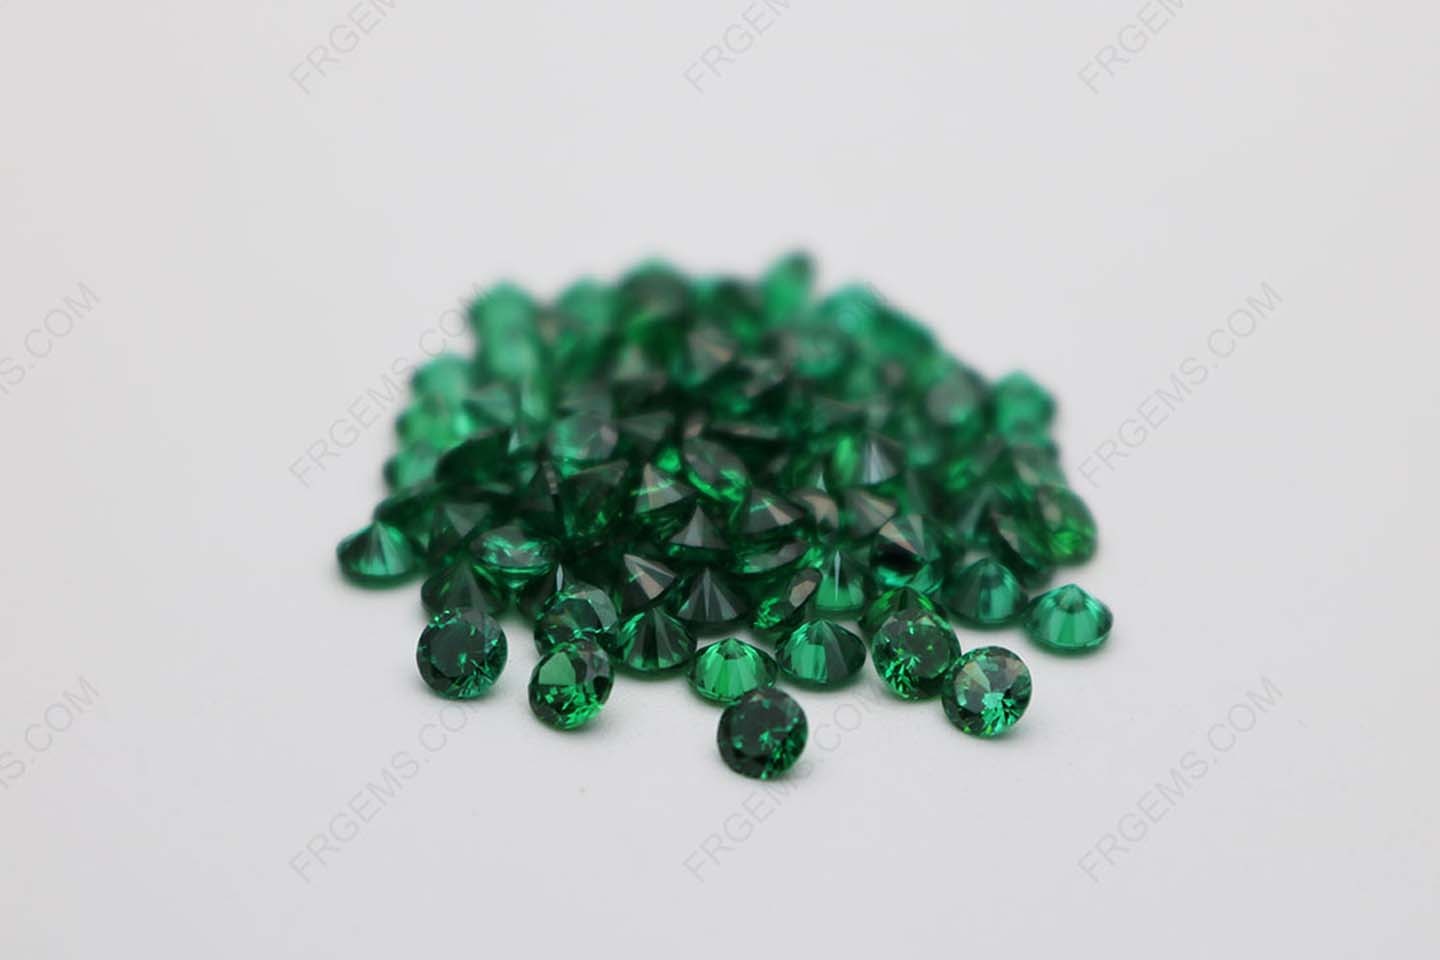 Cubic Zirconia Green Round Shape Faceted cut 5mm stones CZ35 IMG_0361